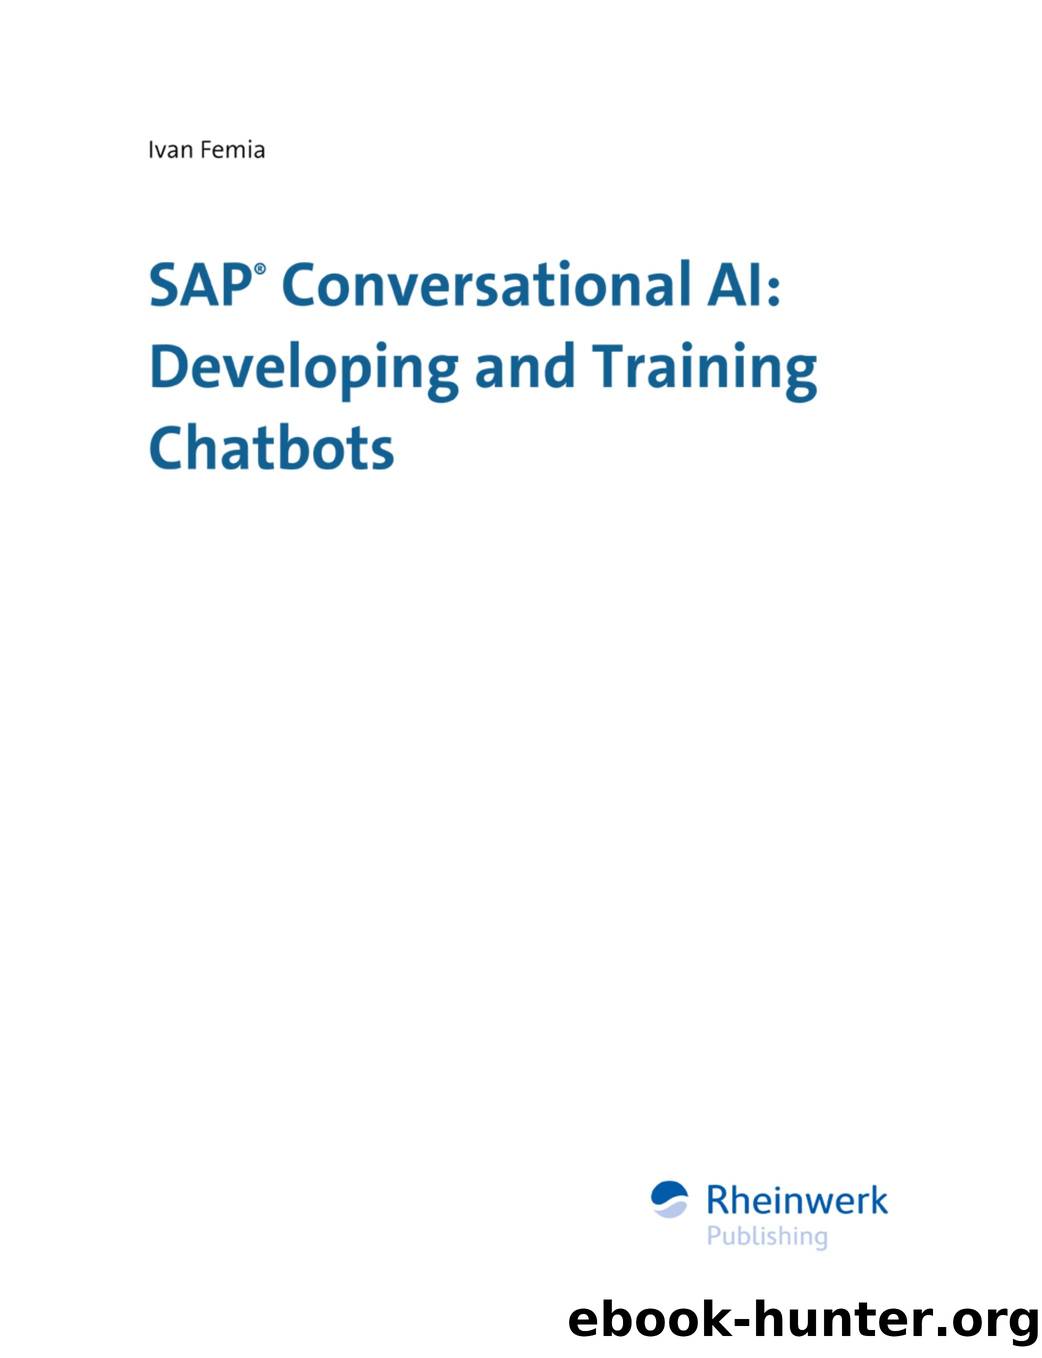 SAP Conversational AI by Developing & Training Chatbots